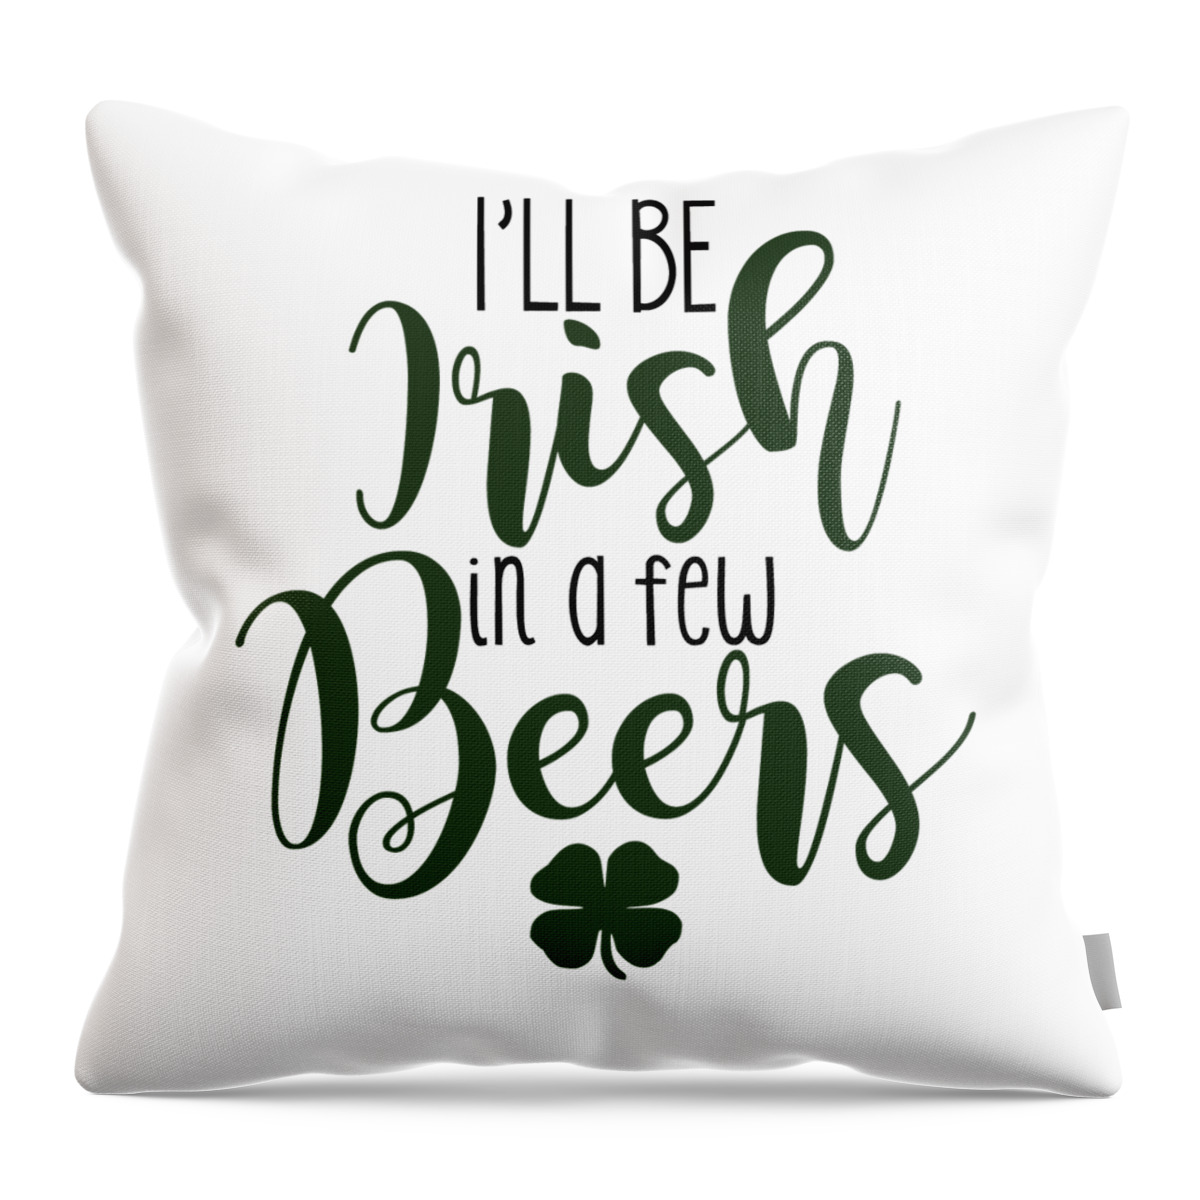 Irish Throw Pillow featuring the digital art Ill Be Irish In a Few Beers by Jacob Zelazny